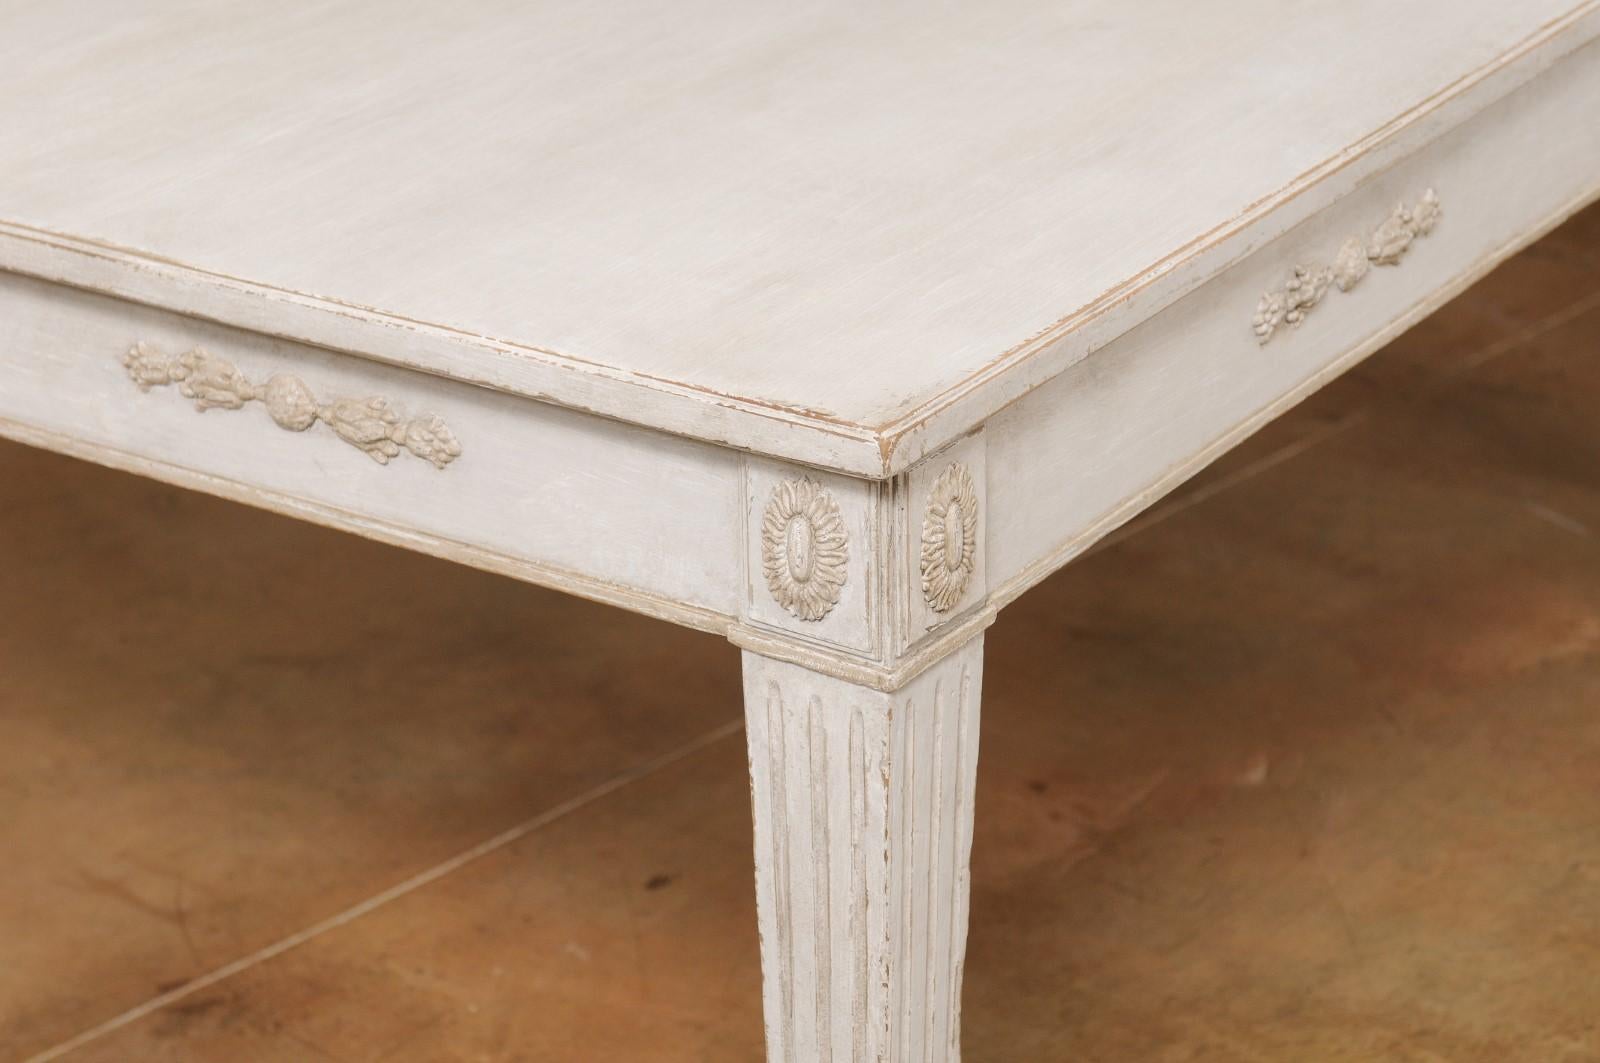 20th Century Swedish 1900 Gustavian Style Dining Table with Carved Apron and Fluted Legs For Sale